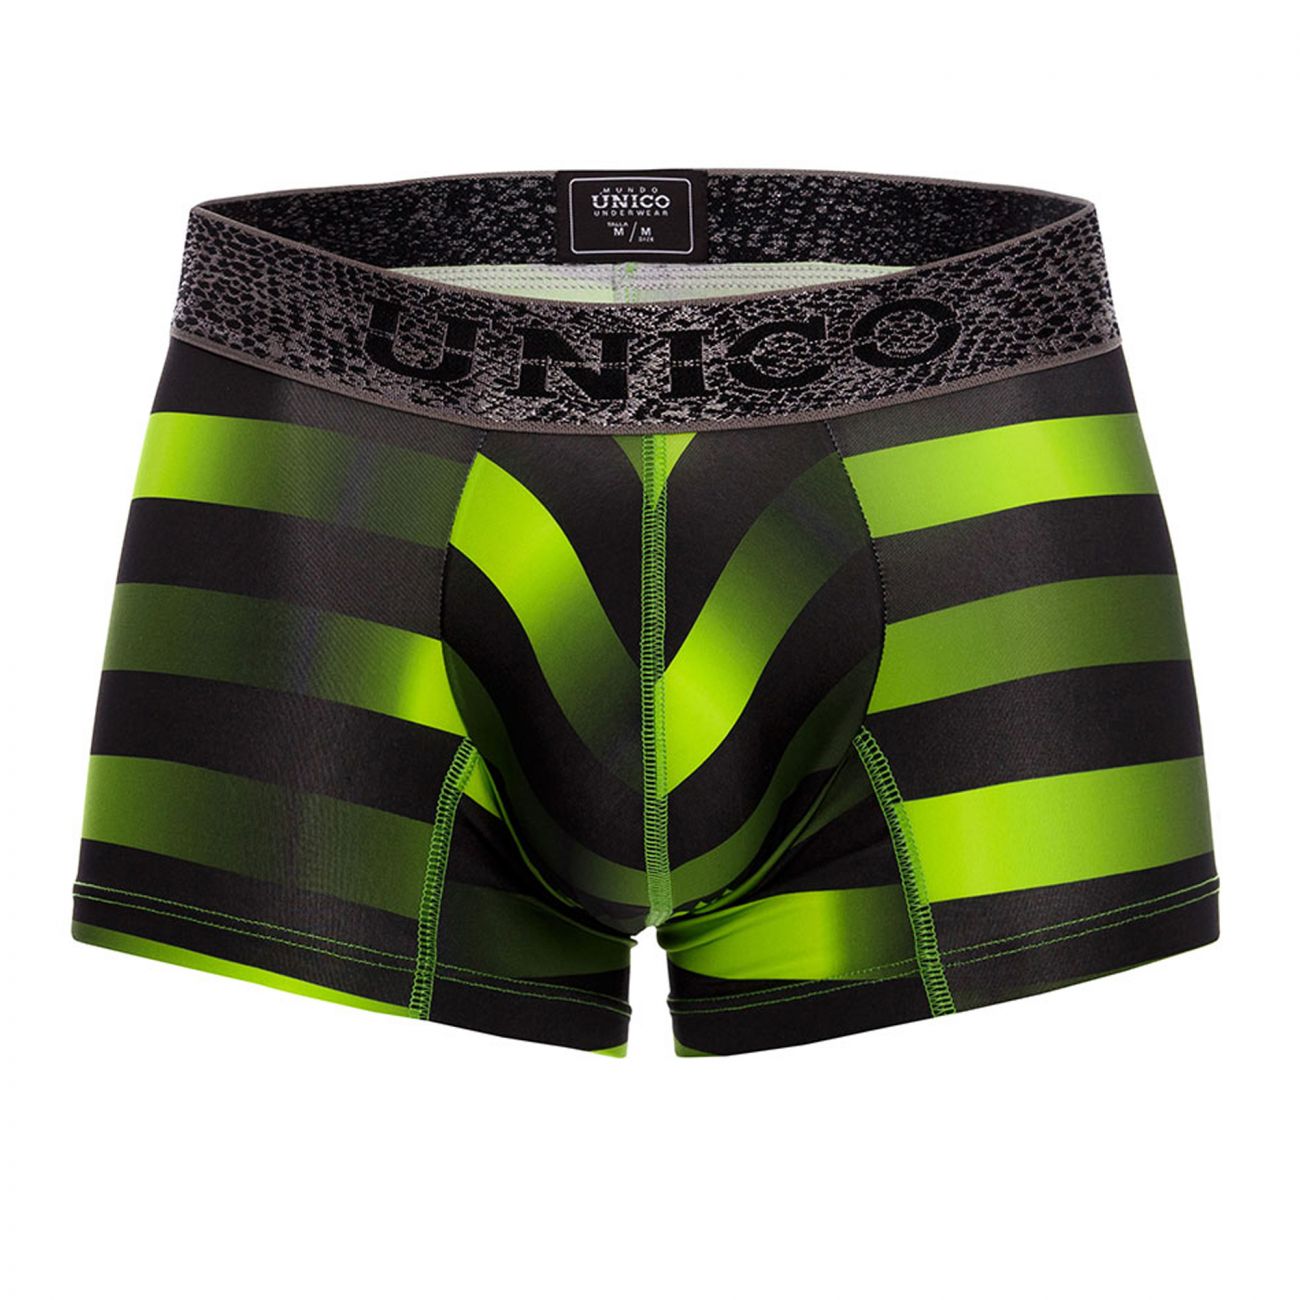 Unico 21070100105 Hive Trunks Color 90-Green